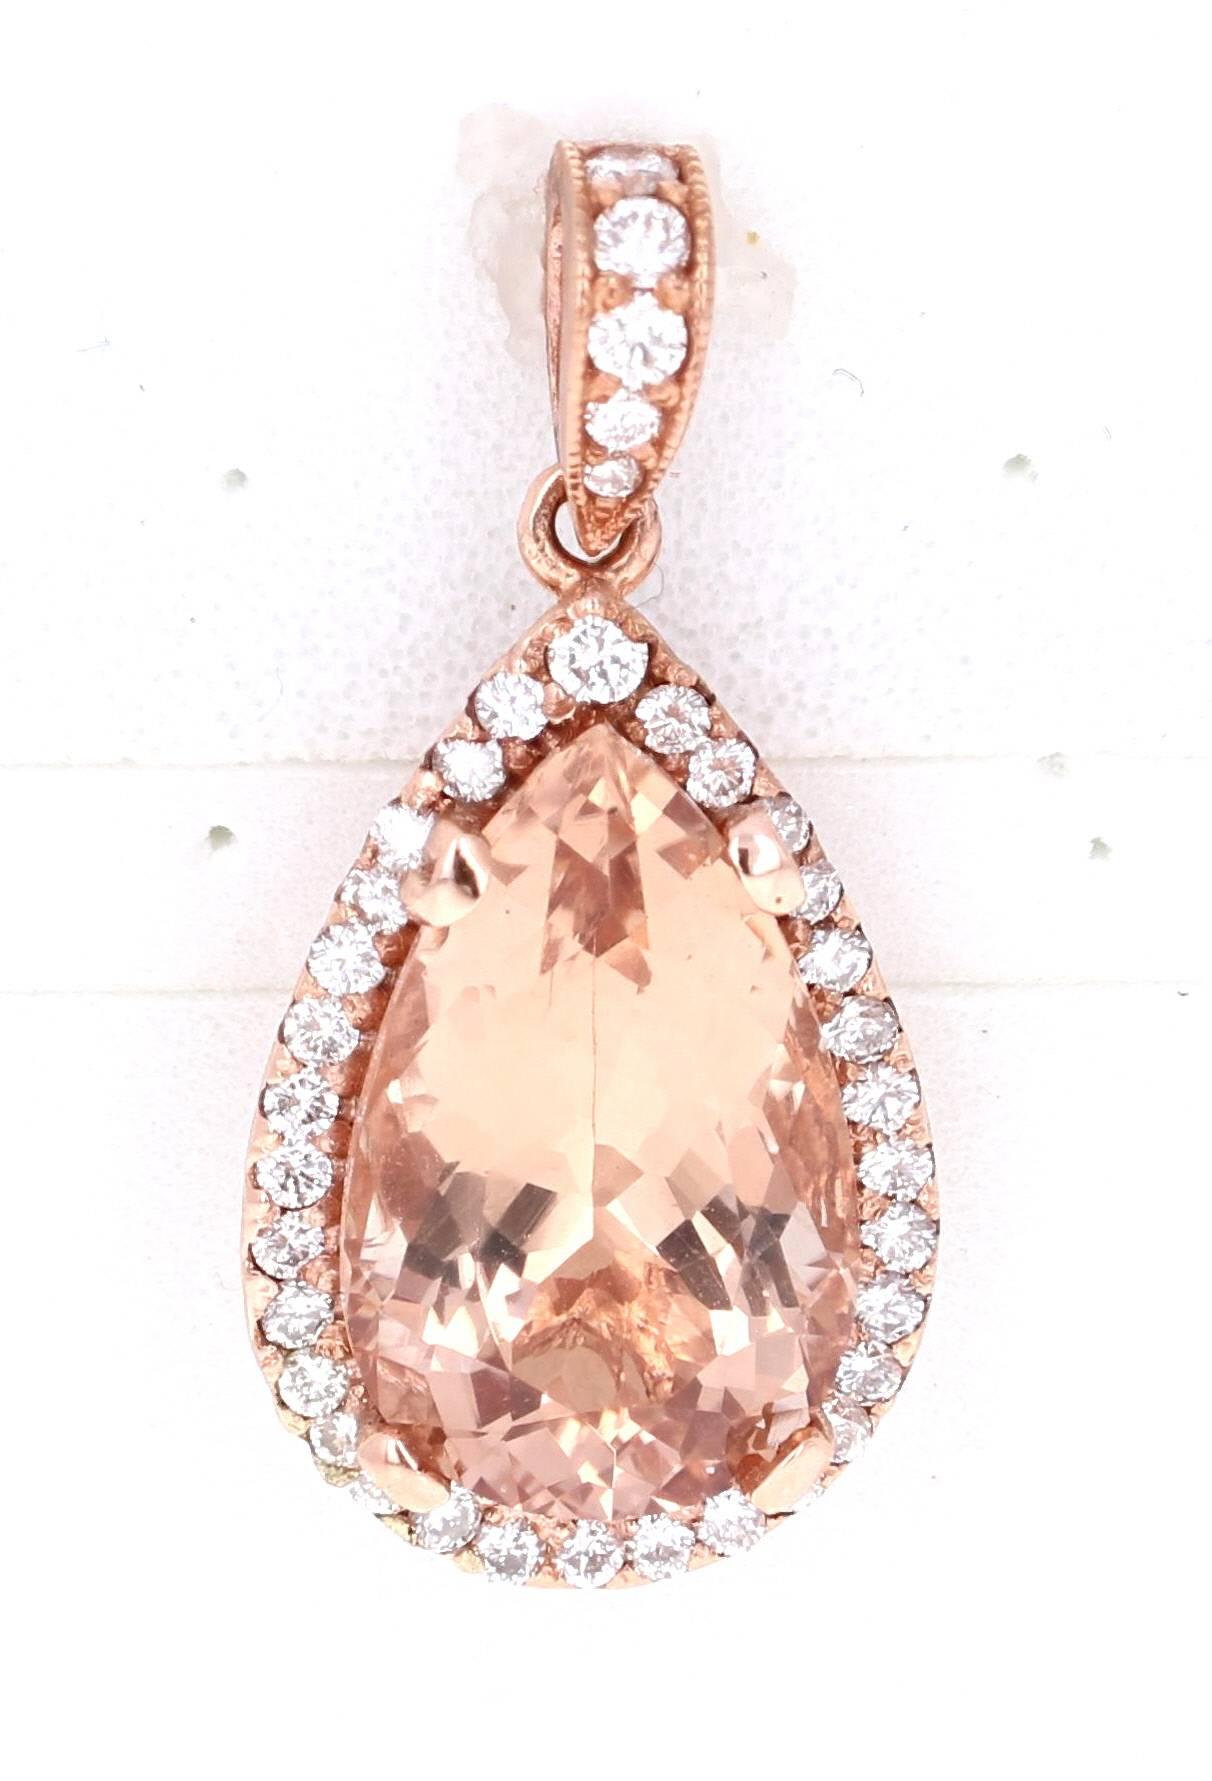 Gorgeous 6.28 Carat Morganite Diamond Rose Gold Pendant to match all your Rose Gold jewelry!

There is a Pear Cut Morganite that weighs 7.70 Carats and is surrounded by 36 Round Cut Diamonds that weigh 0.70 Carats.  The total carat weight of the